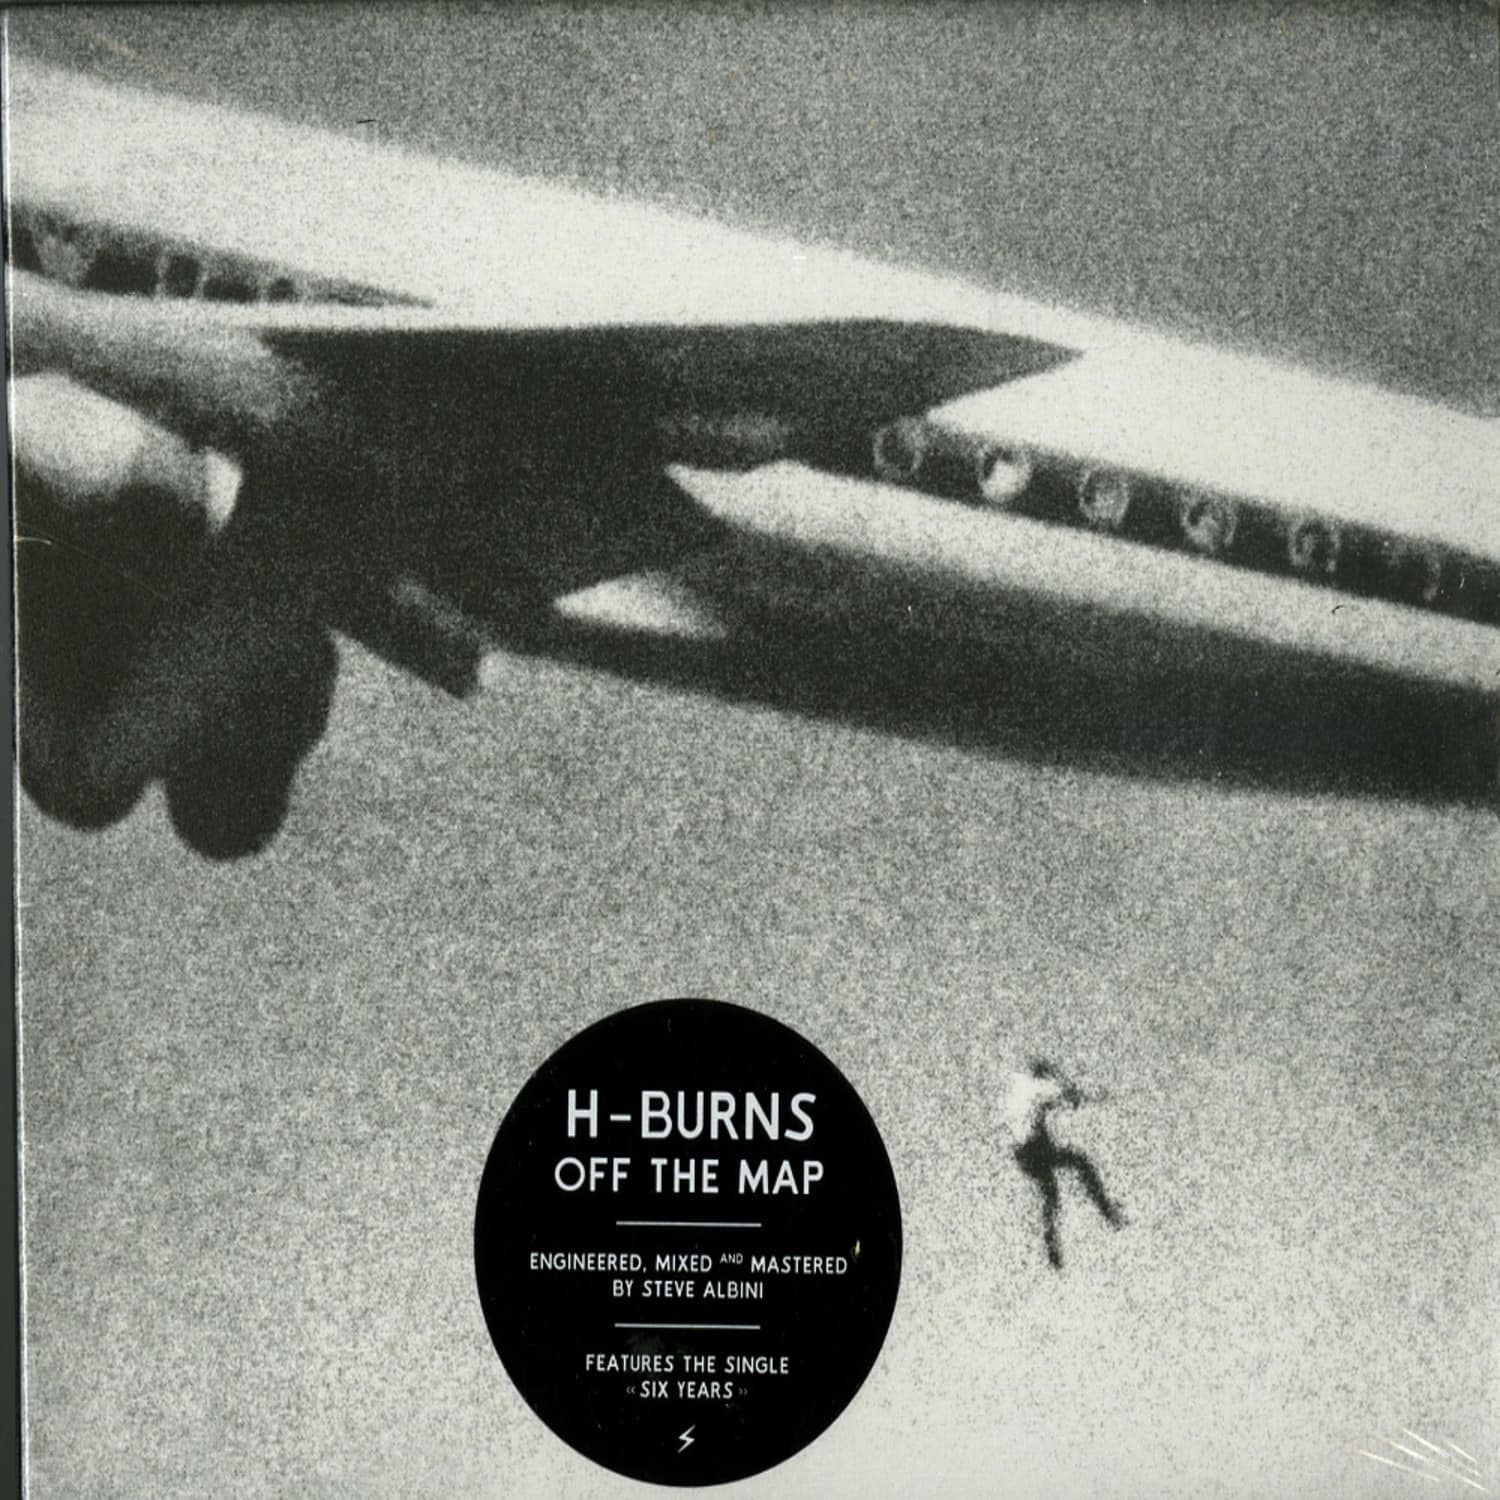 H Burns - OFF THE MAP 